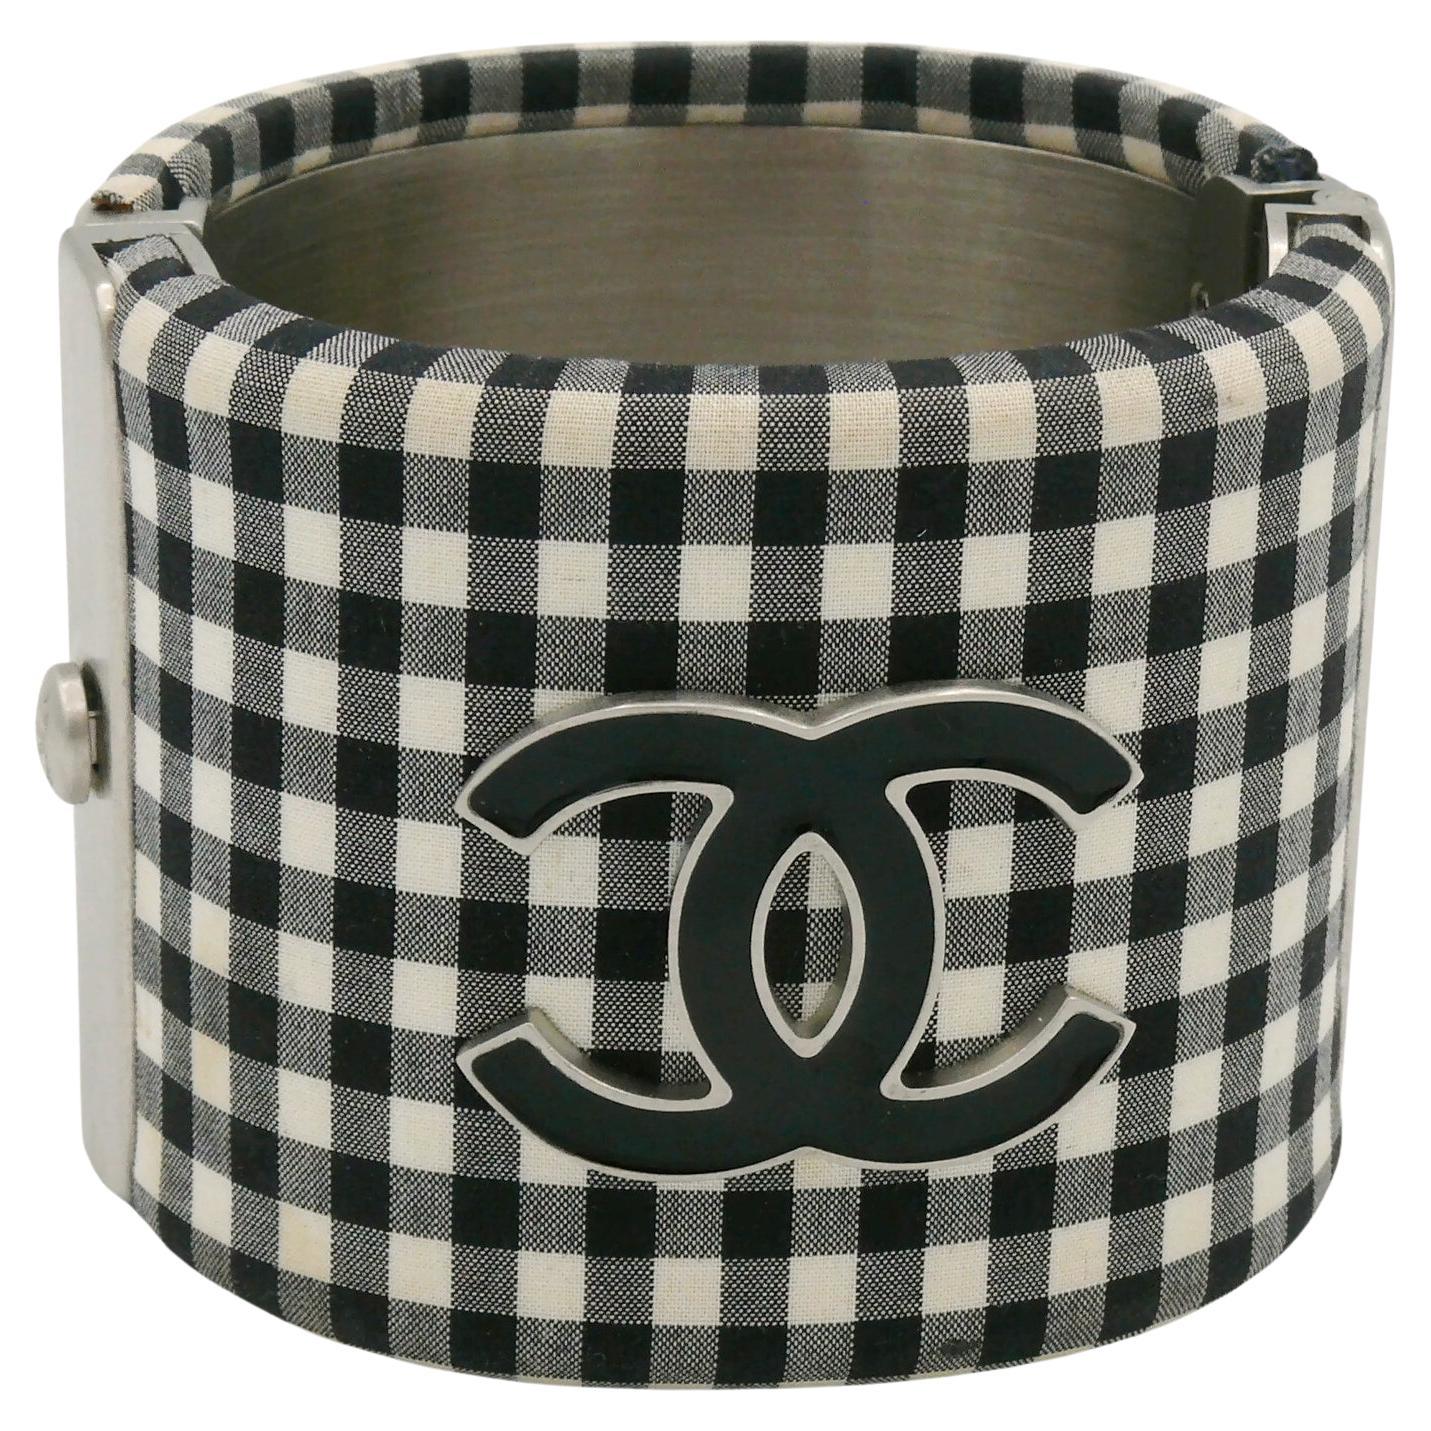 CHANEL Black and White Gingham Vichy Print Cuff Bracelet, Resort Collection 2011 For Sale